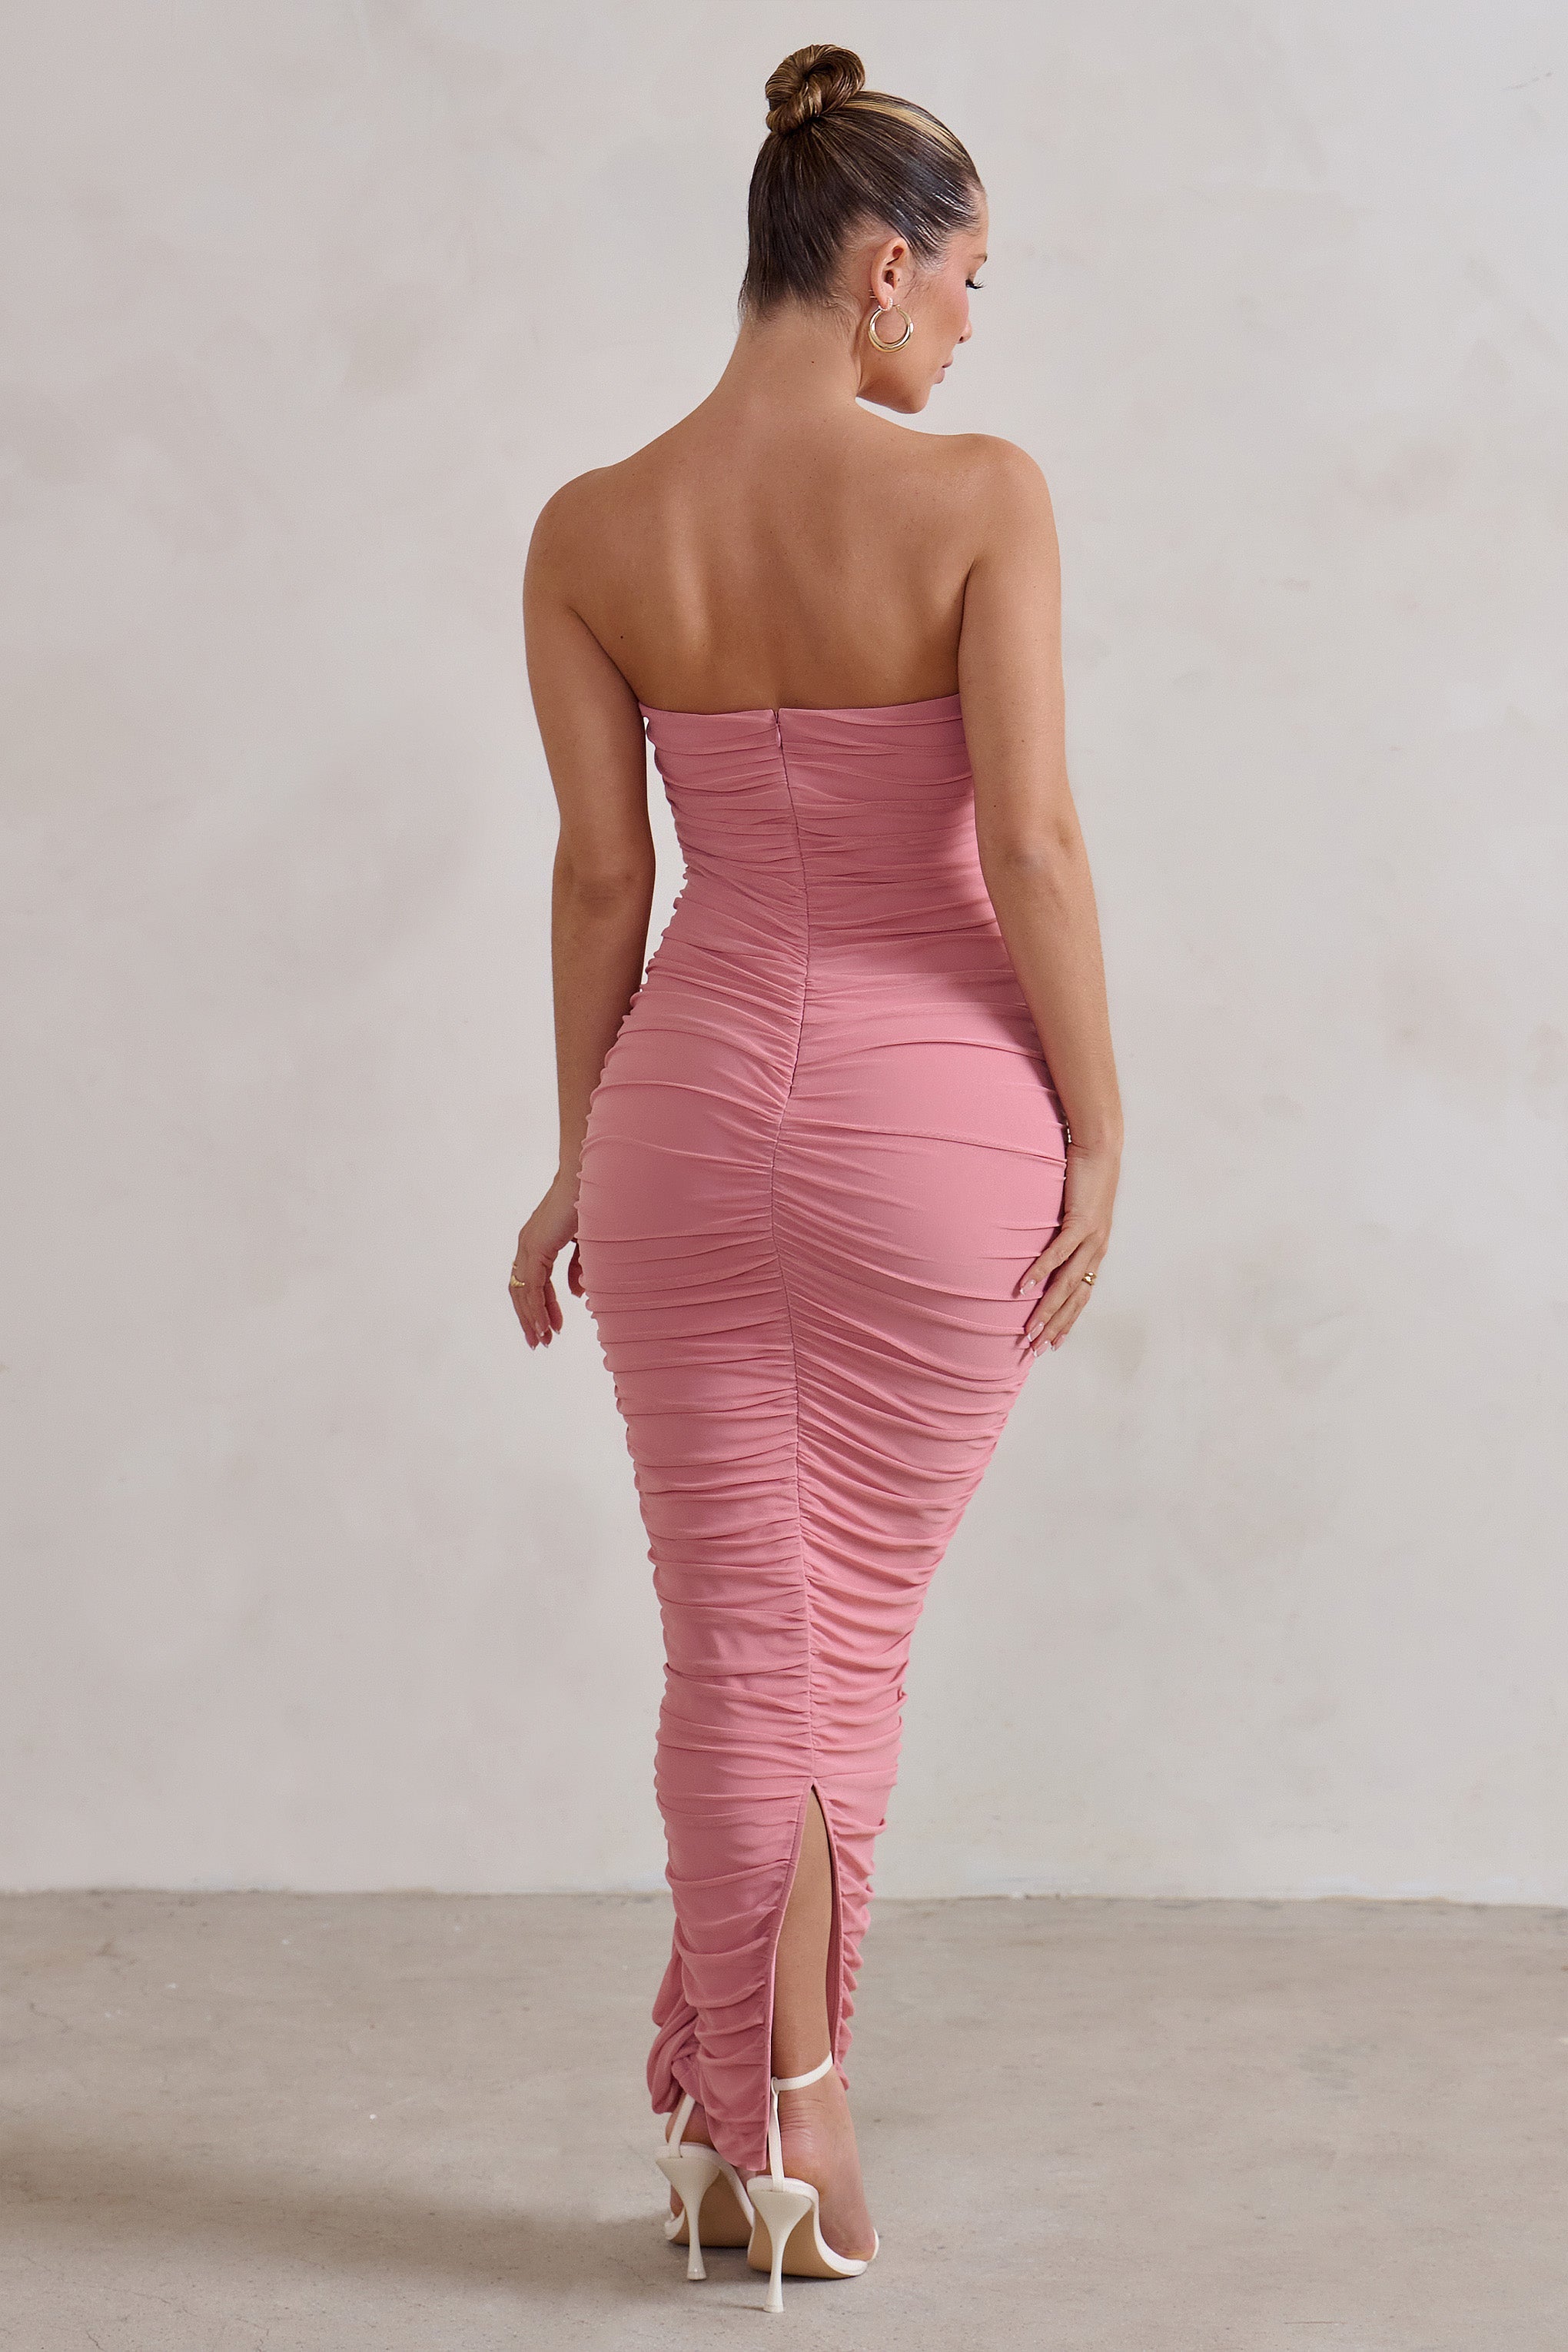 My Lady Powder Pink Strapless Bodycon Ruched Mesh Maxi Dress